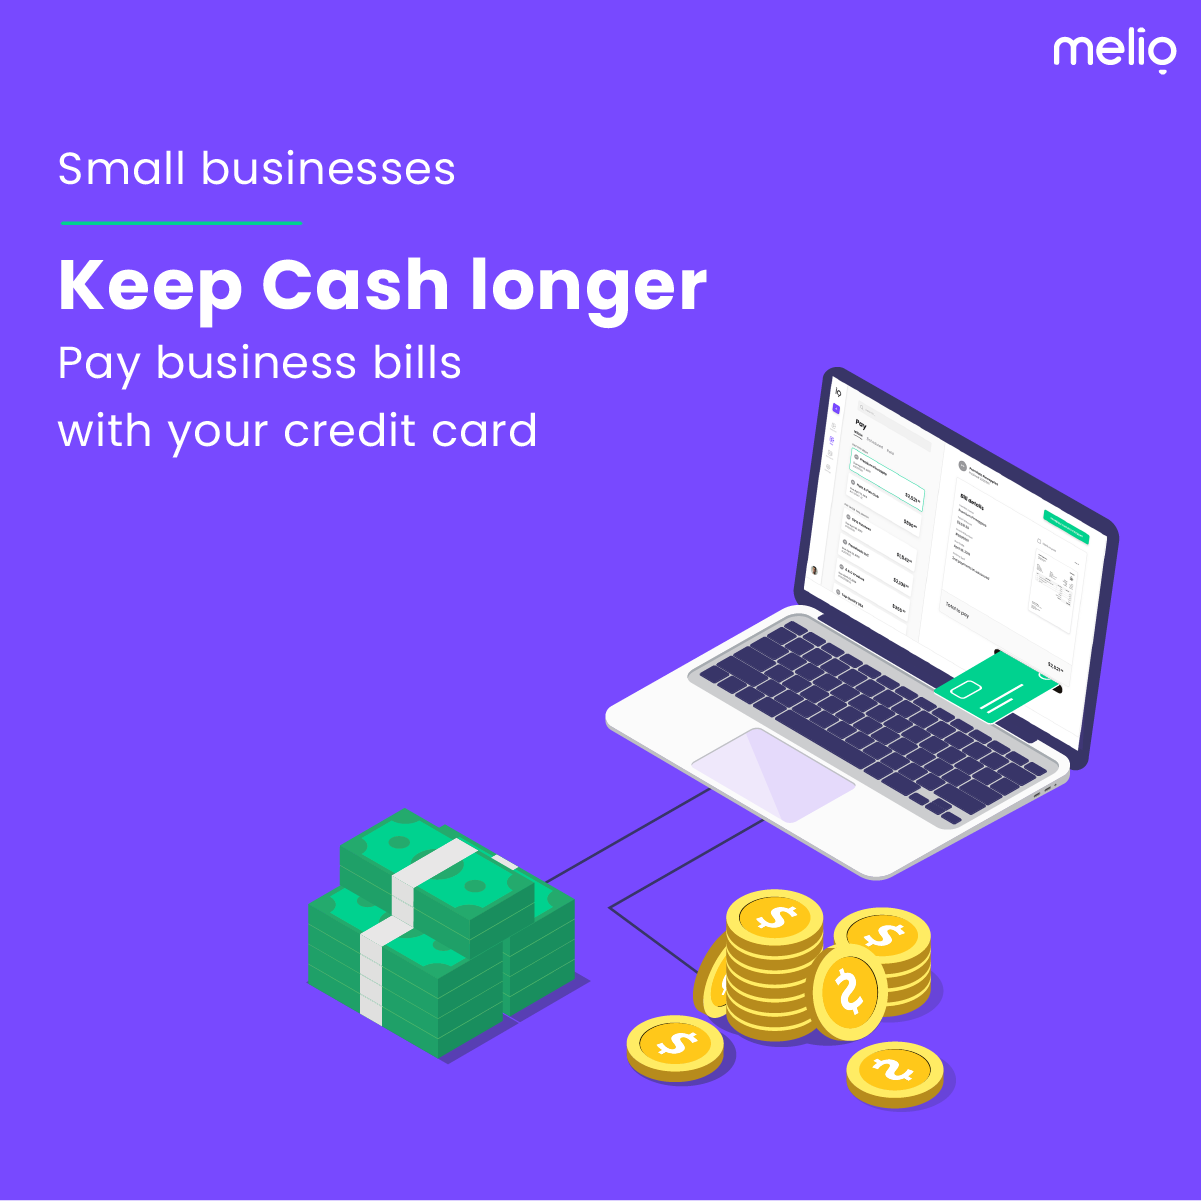 Help cash flow and earn points by using your credit card to pay business bills